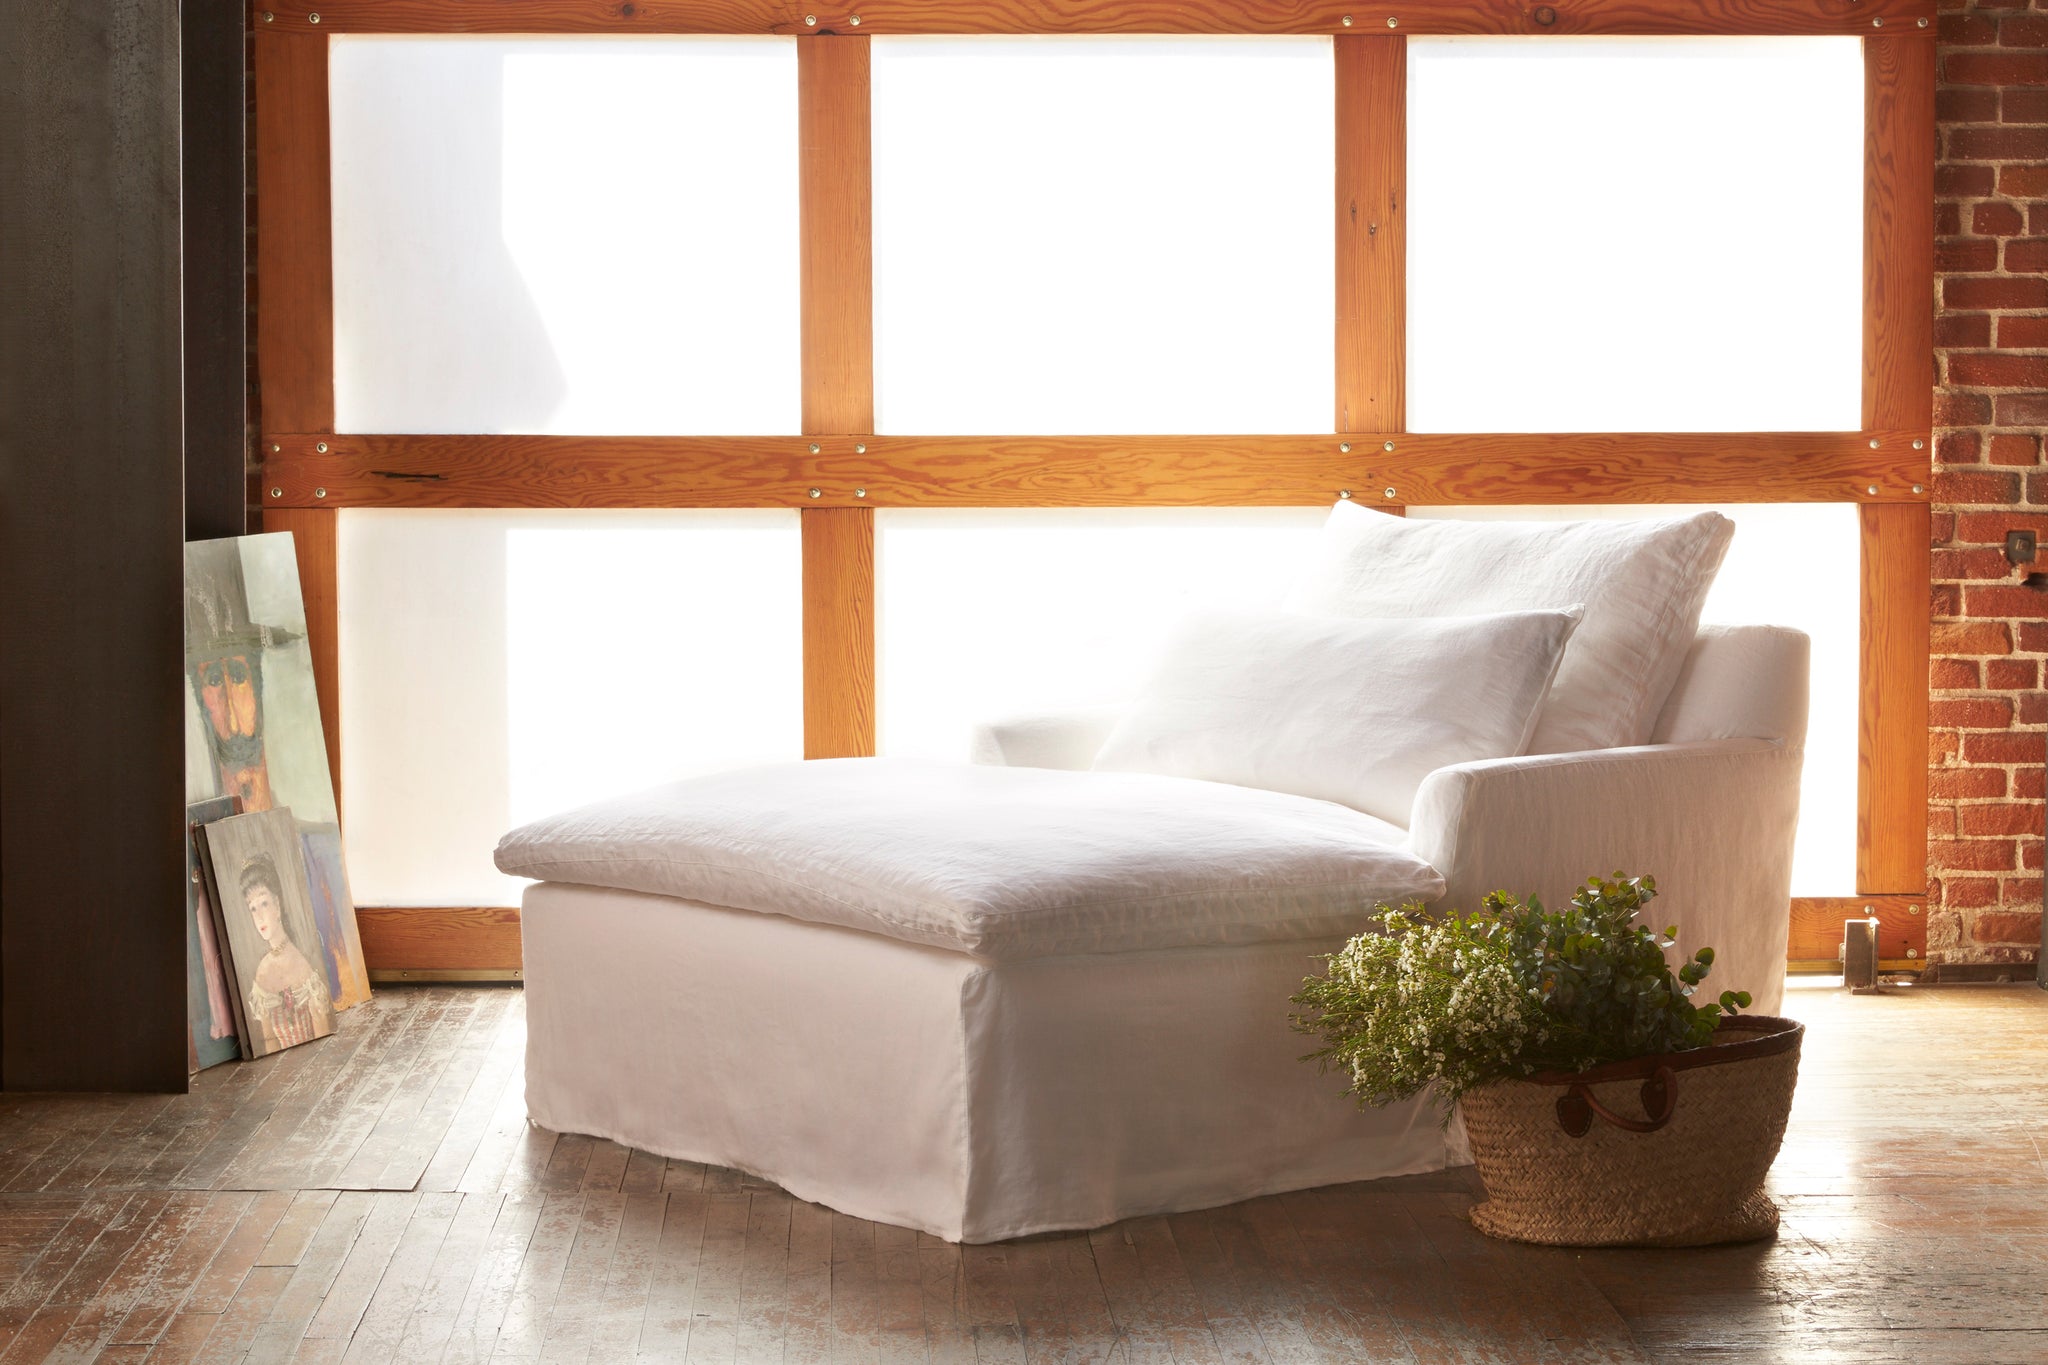  Light filled interior with Donato Double Chaise in Otis White. Photographed in Otis White. 